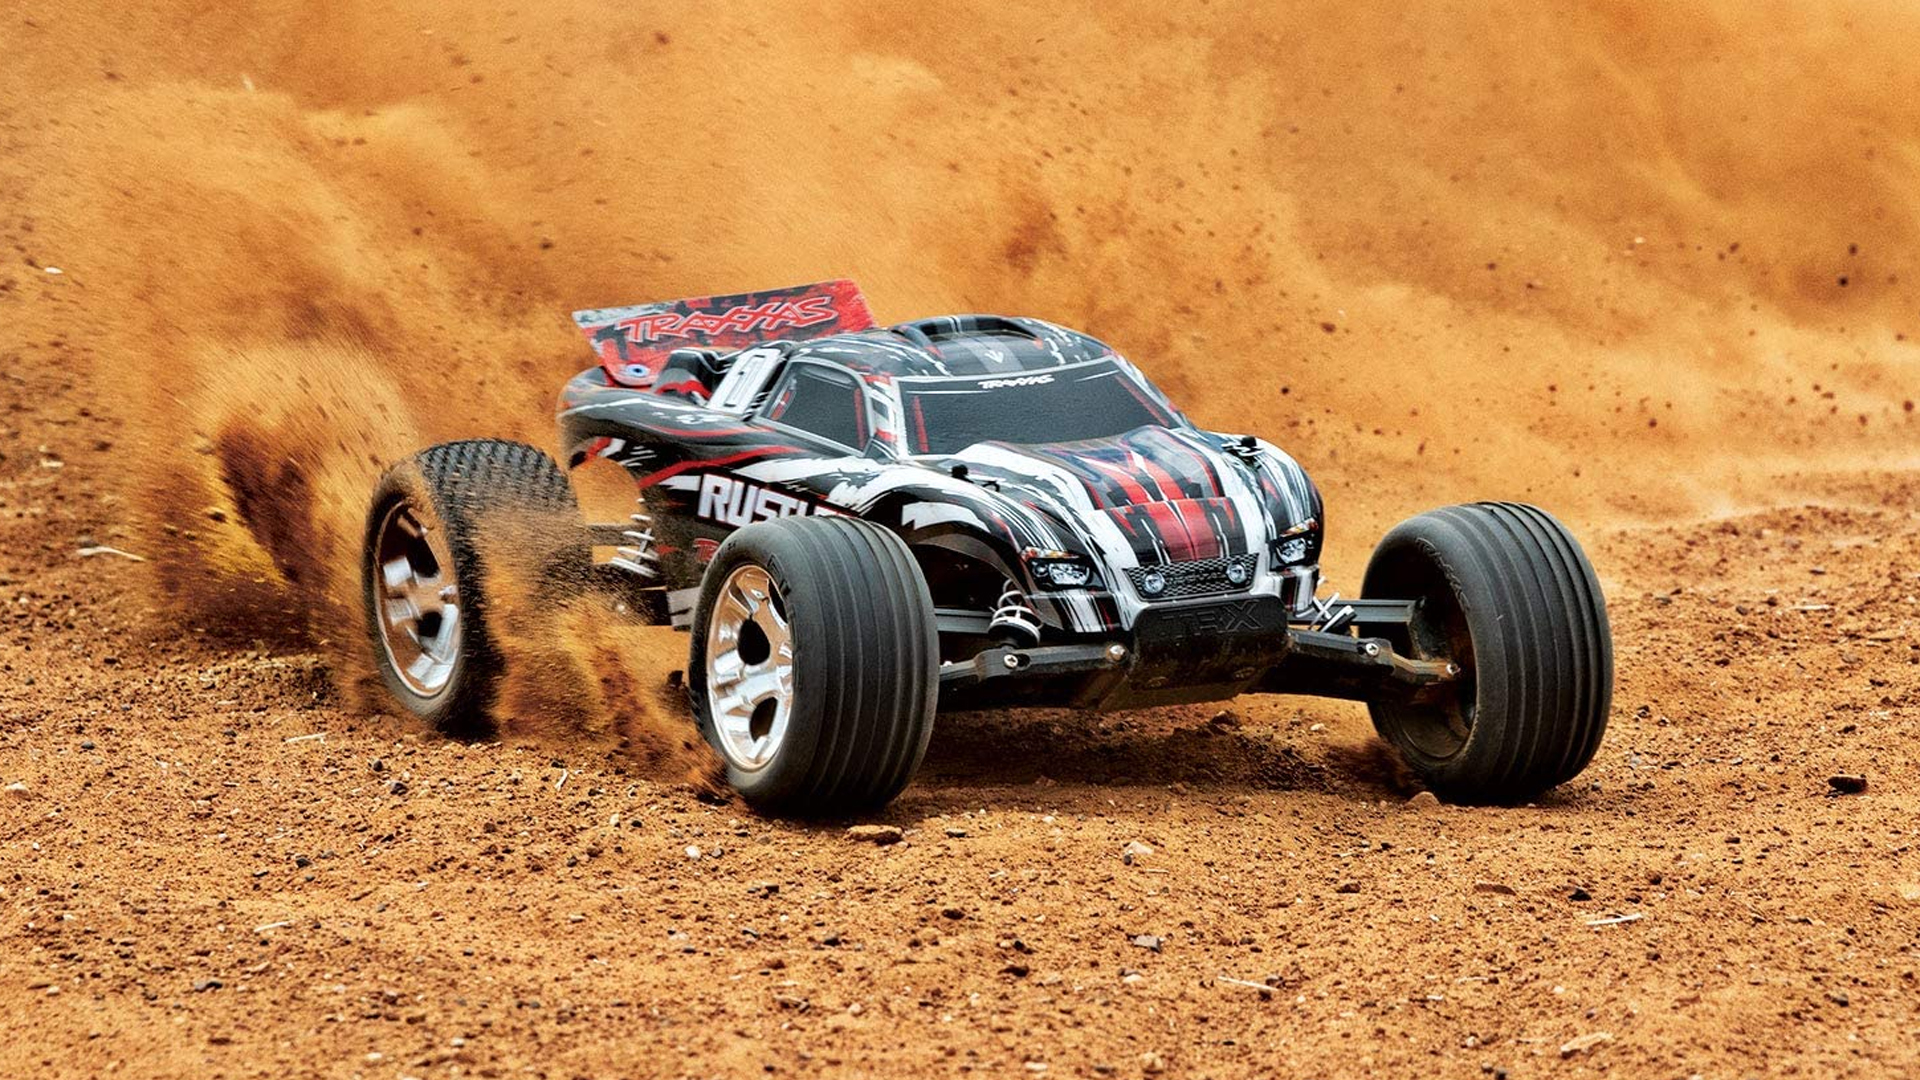 Super Large Rc Cars,Remote Control Car 1:14 RC Stunt Racing Car Vehicle for Kids Boys Girls 3 Year Up,Kids Toy Double Sided Fast Off Road 